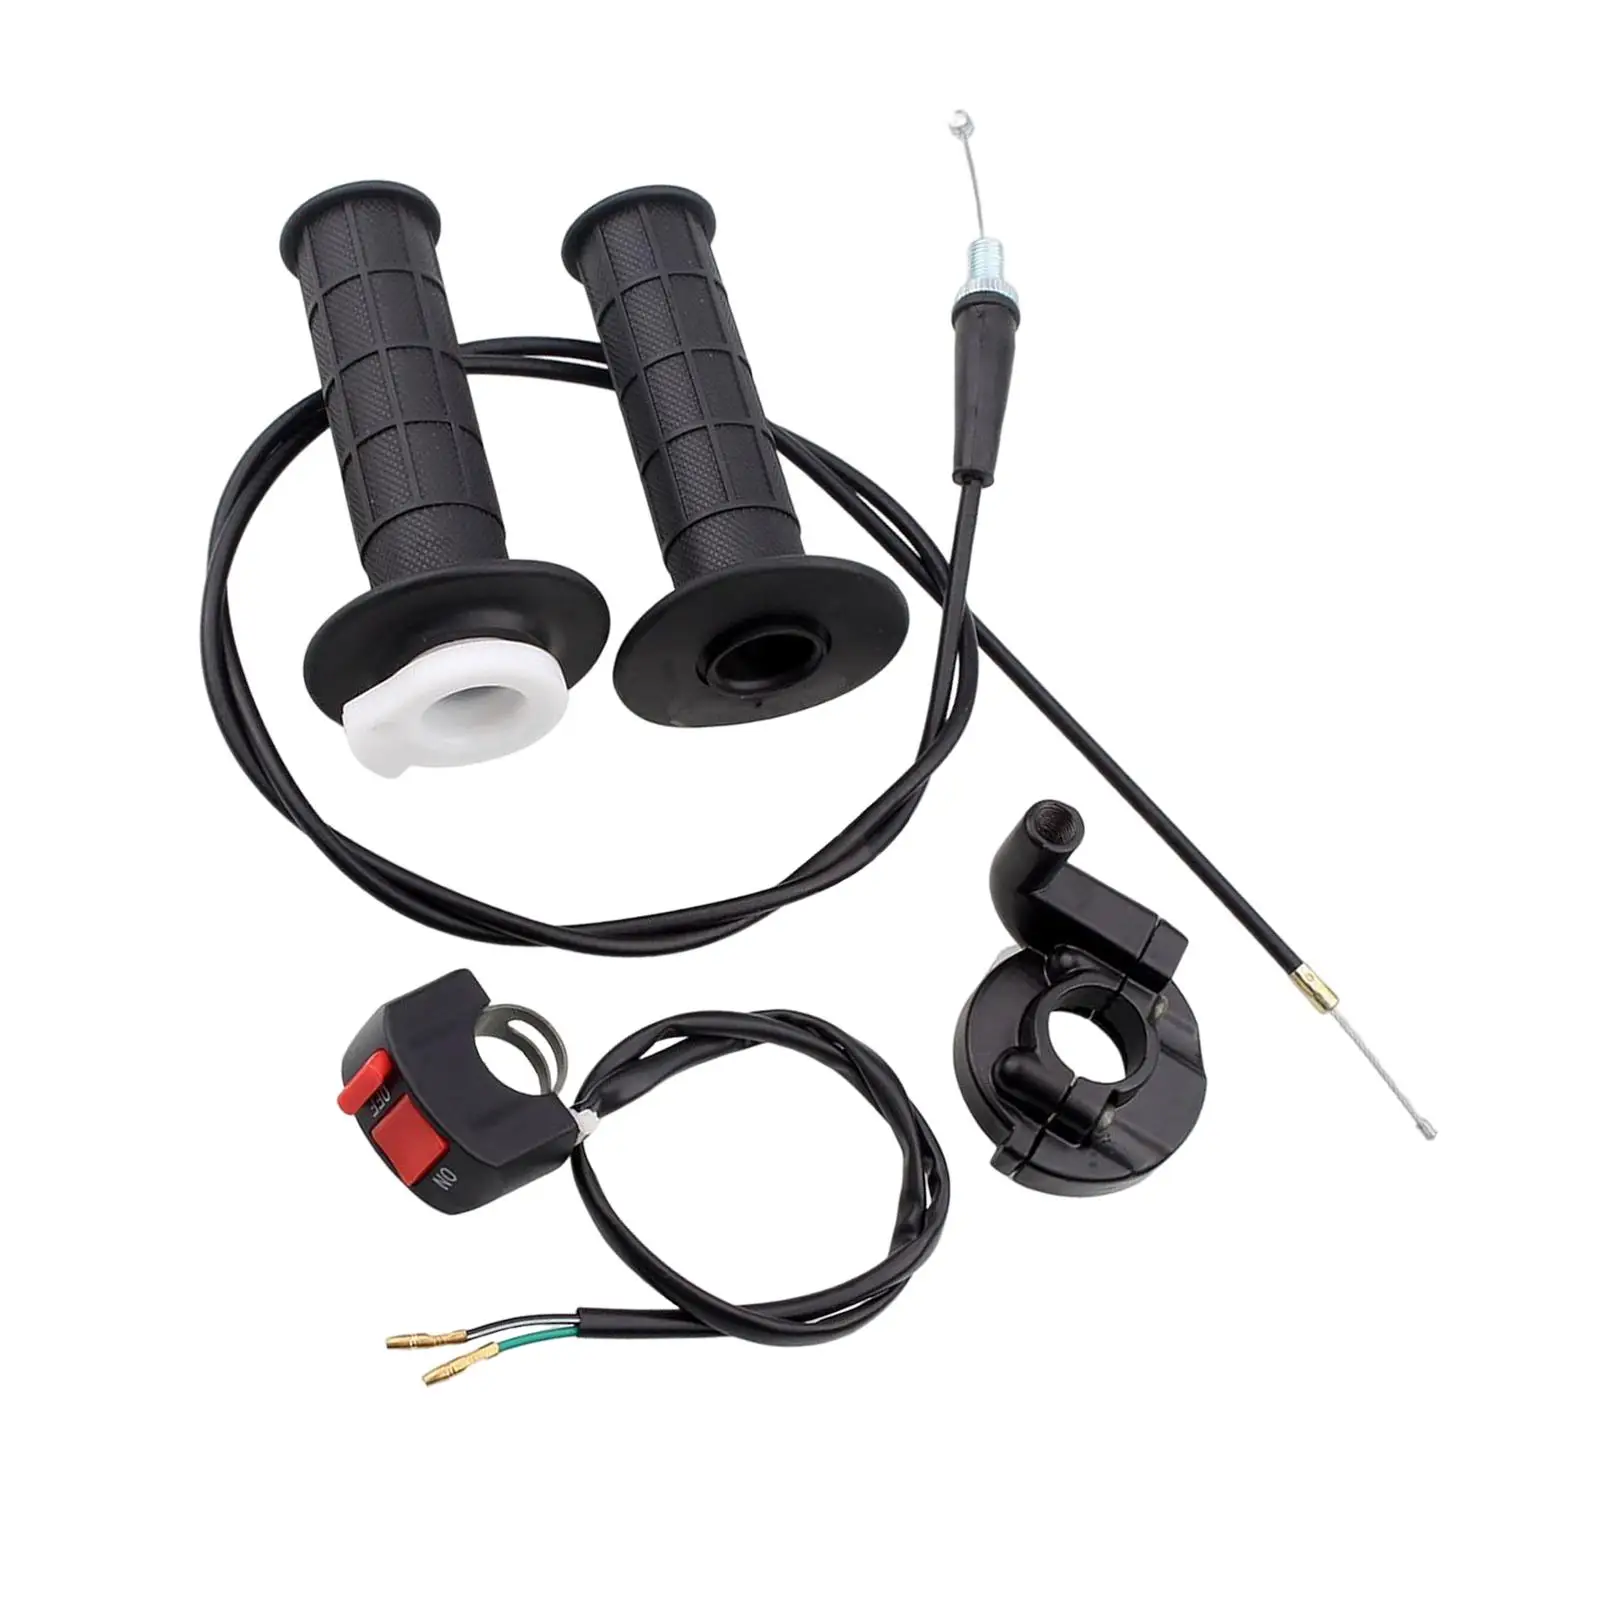 Throttle Accelerator Handle and Cable Kit with Kill On Off Switch for 50cc 150cc 250cc Mini Bike Accessories Durable